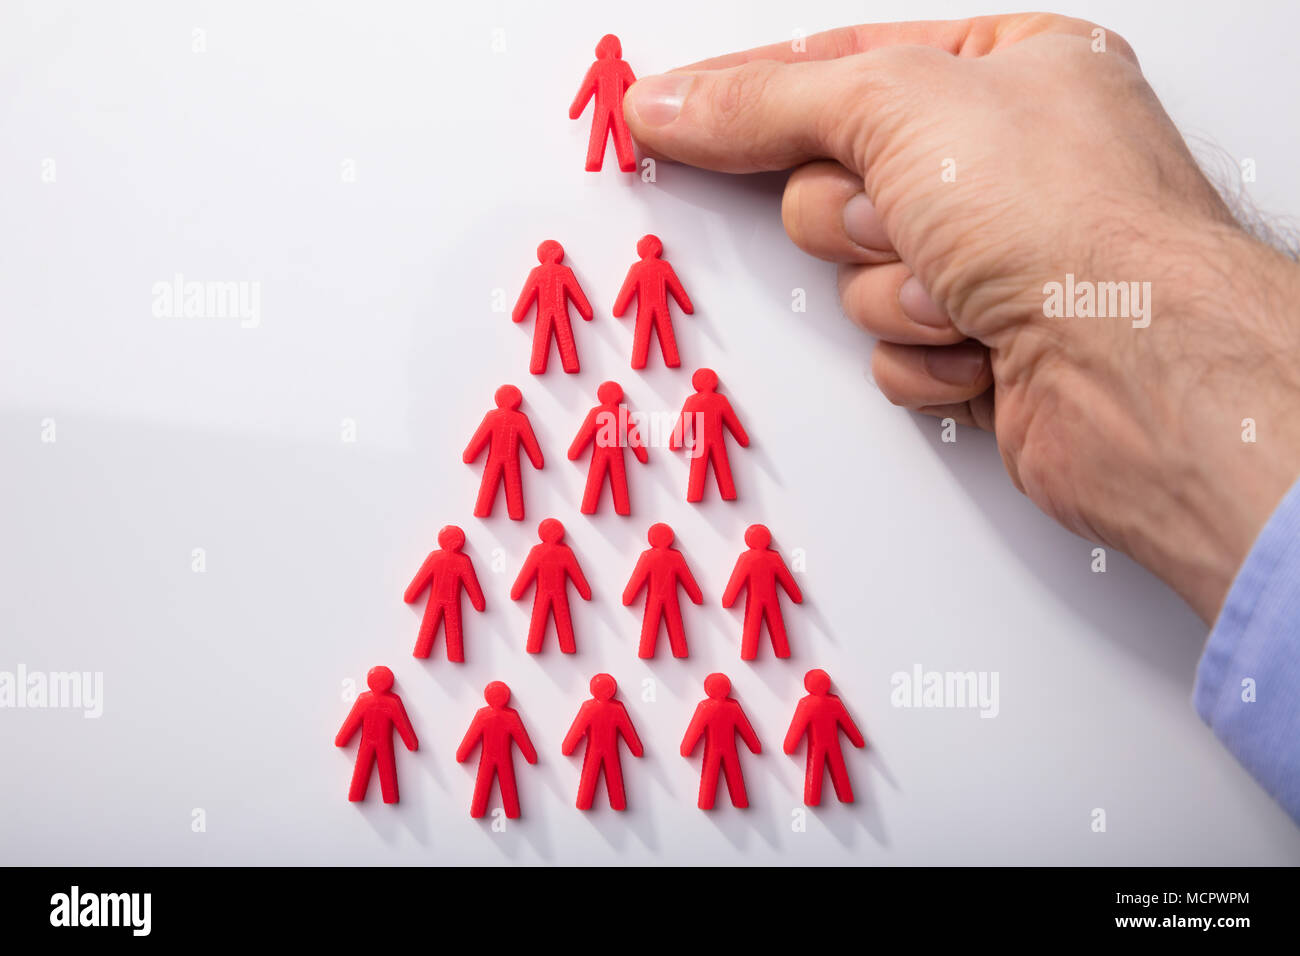 Close-up Of A Person's Hand Arranging Red Human Figures In Triangular Shape On White Background Stock Photo